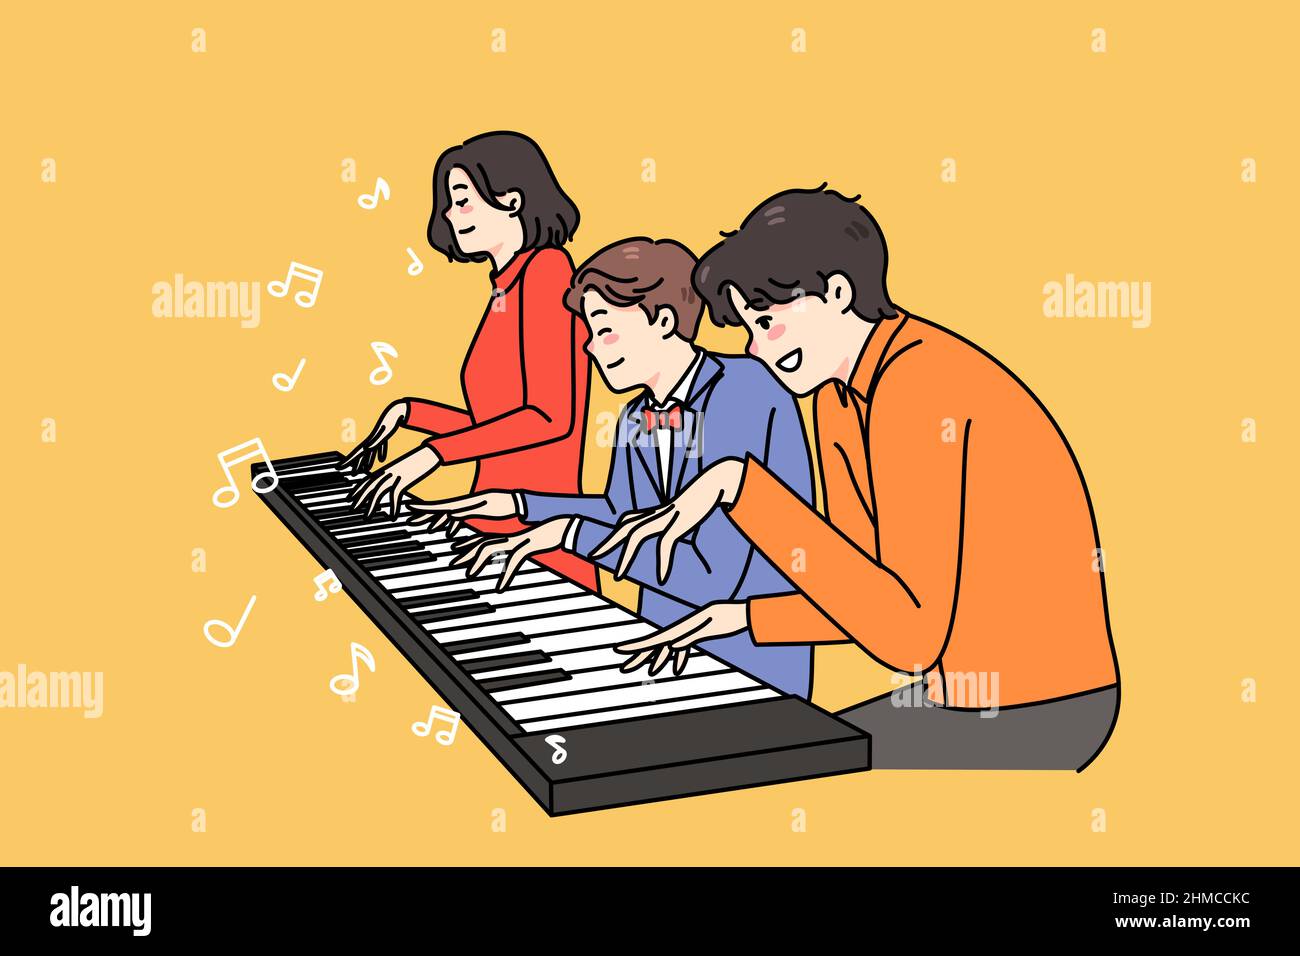 Happy family with son have fun playing one piano together. Smiling parents and kid enjoy weekend involved in music improvisation. Musician hobby and entertainment. Vector illustration.  Stock Vector